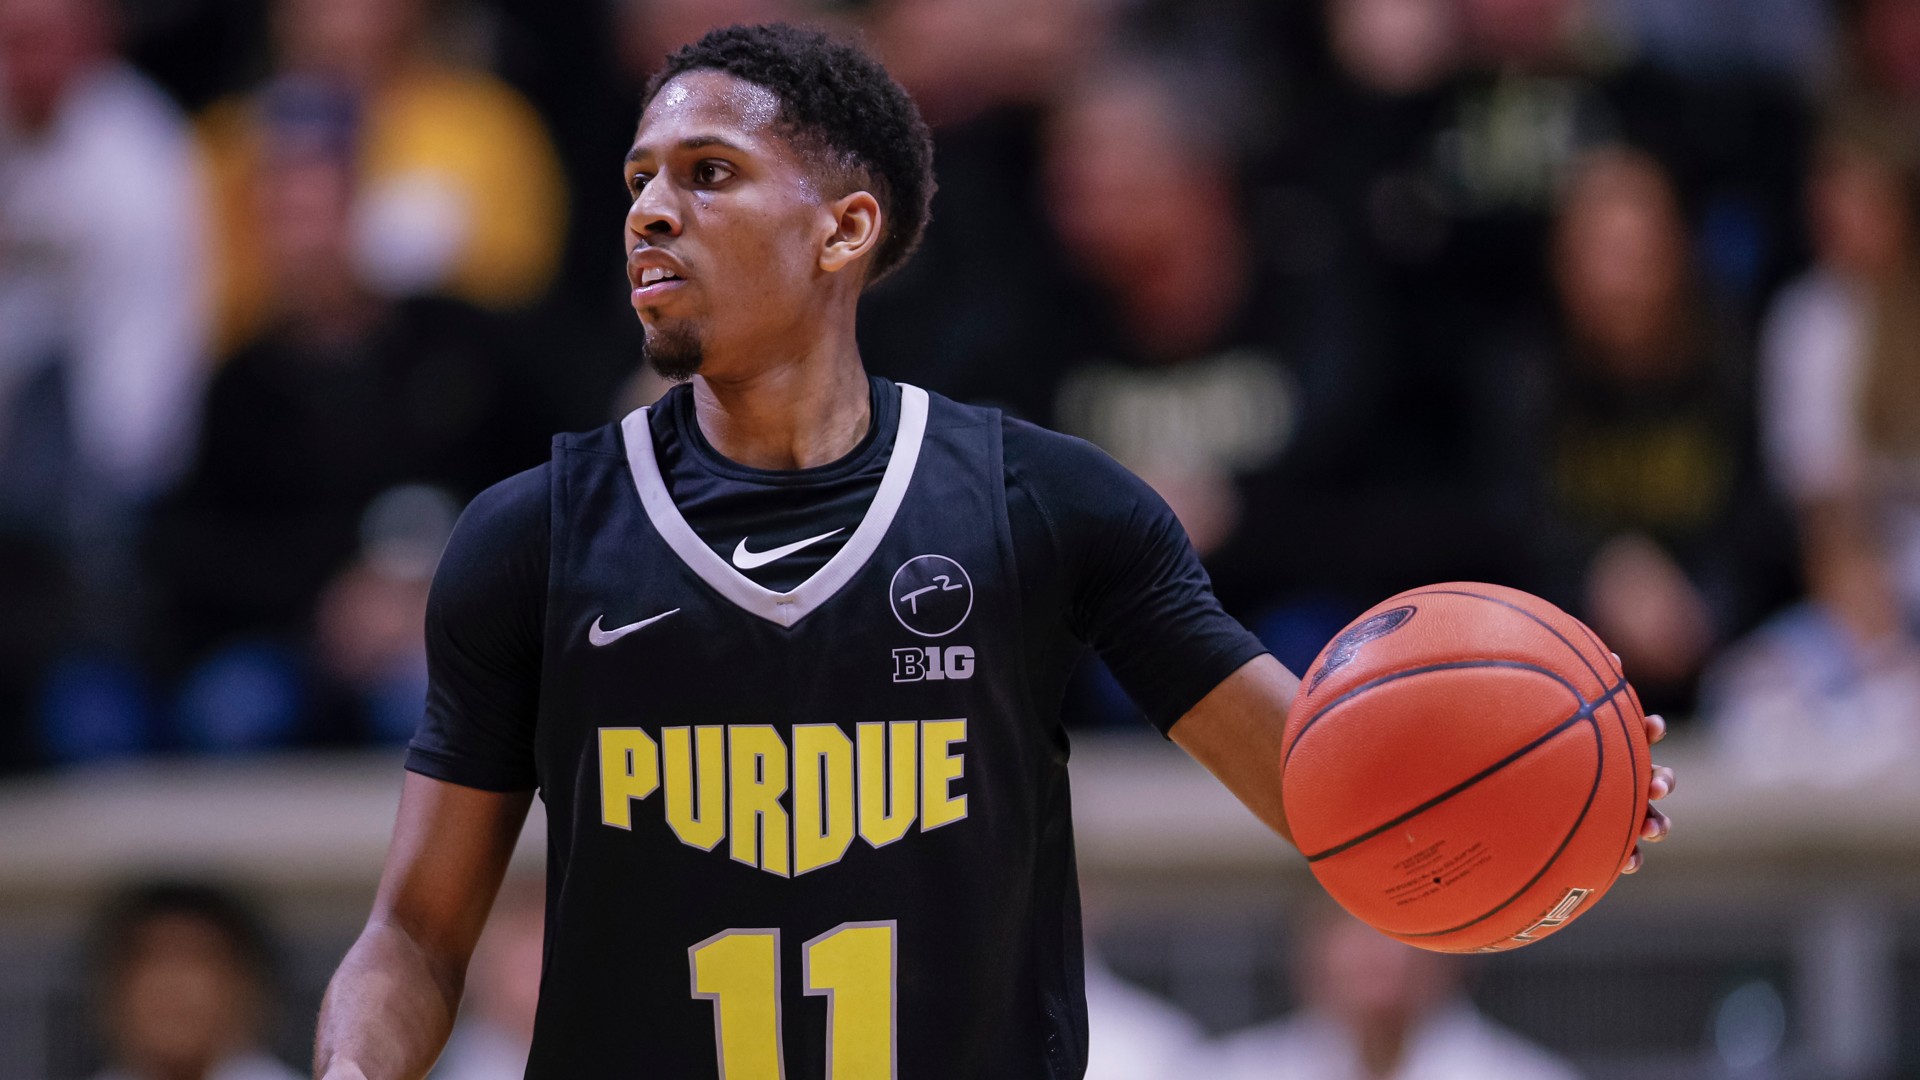 College Basketball Odds & Picks: How to Bet Ohio State vs. Purdue, TCU vs. Oklahoma State, More (Wednesday, December 16) article feature image